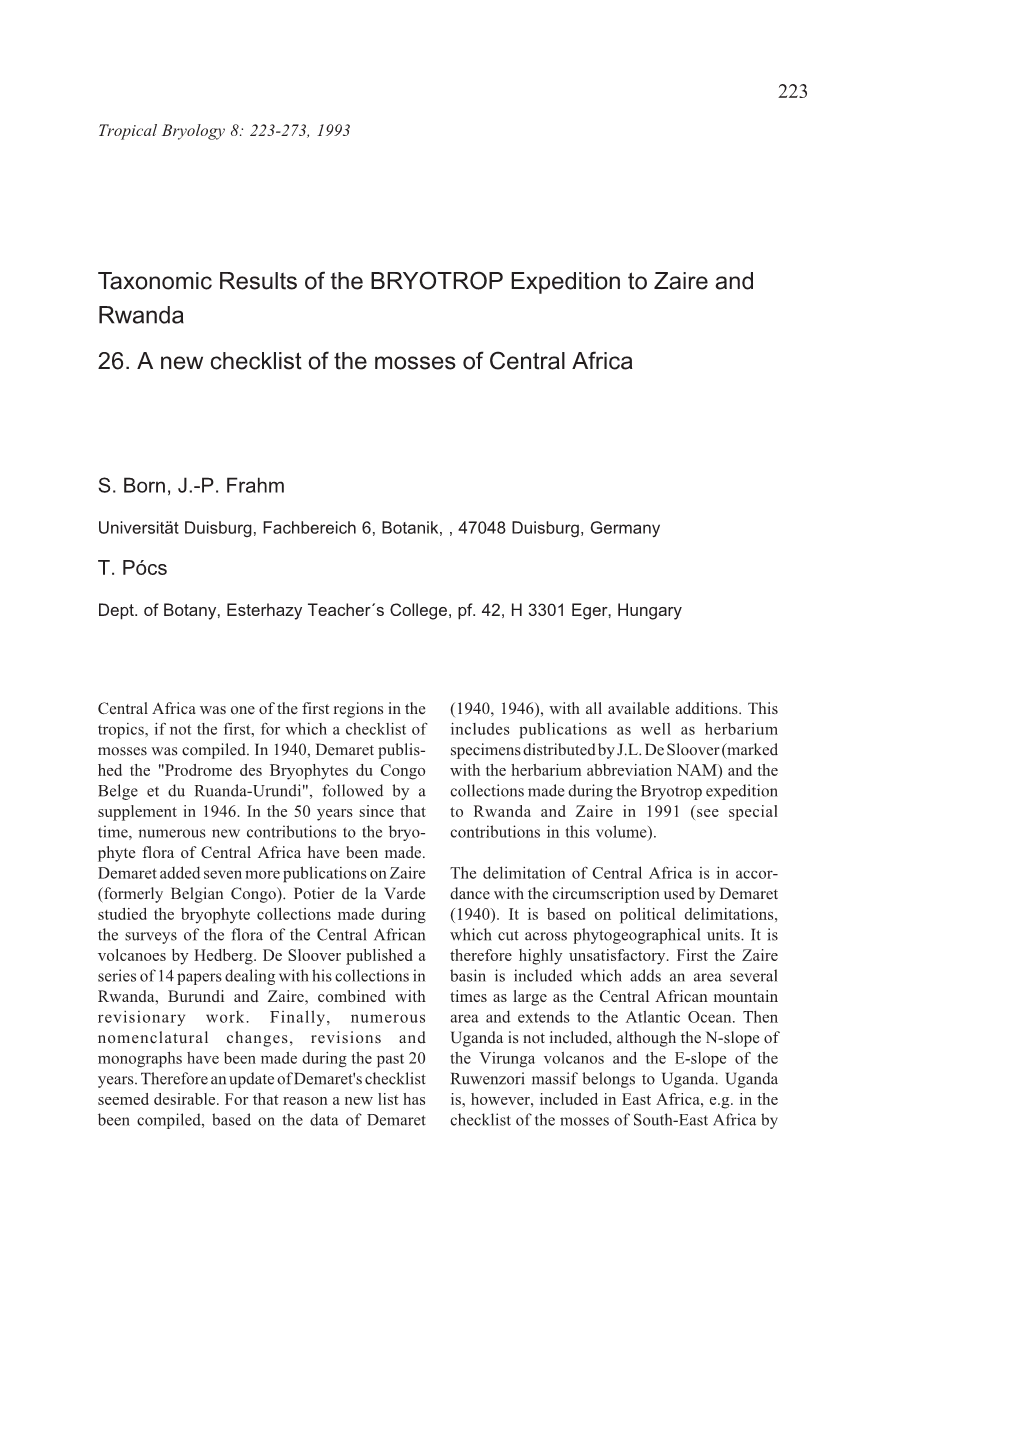 Taxonomic Results of the BRYOTROP Expedition to Zaire and Rwanda 26